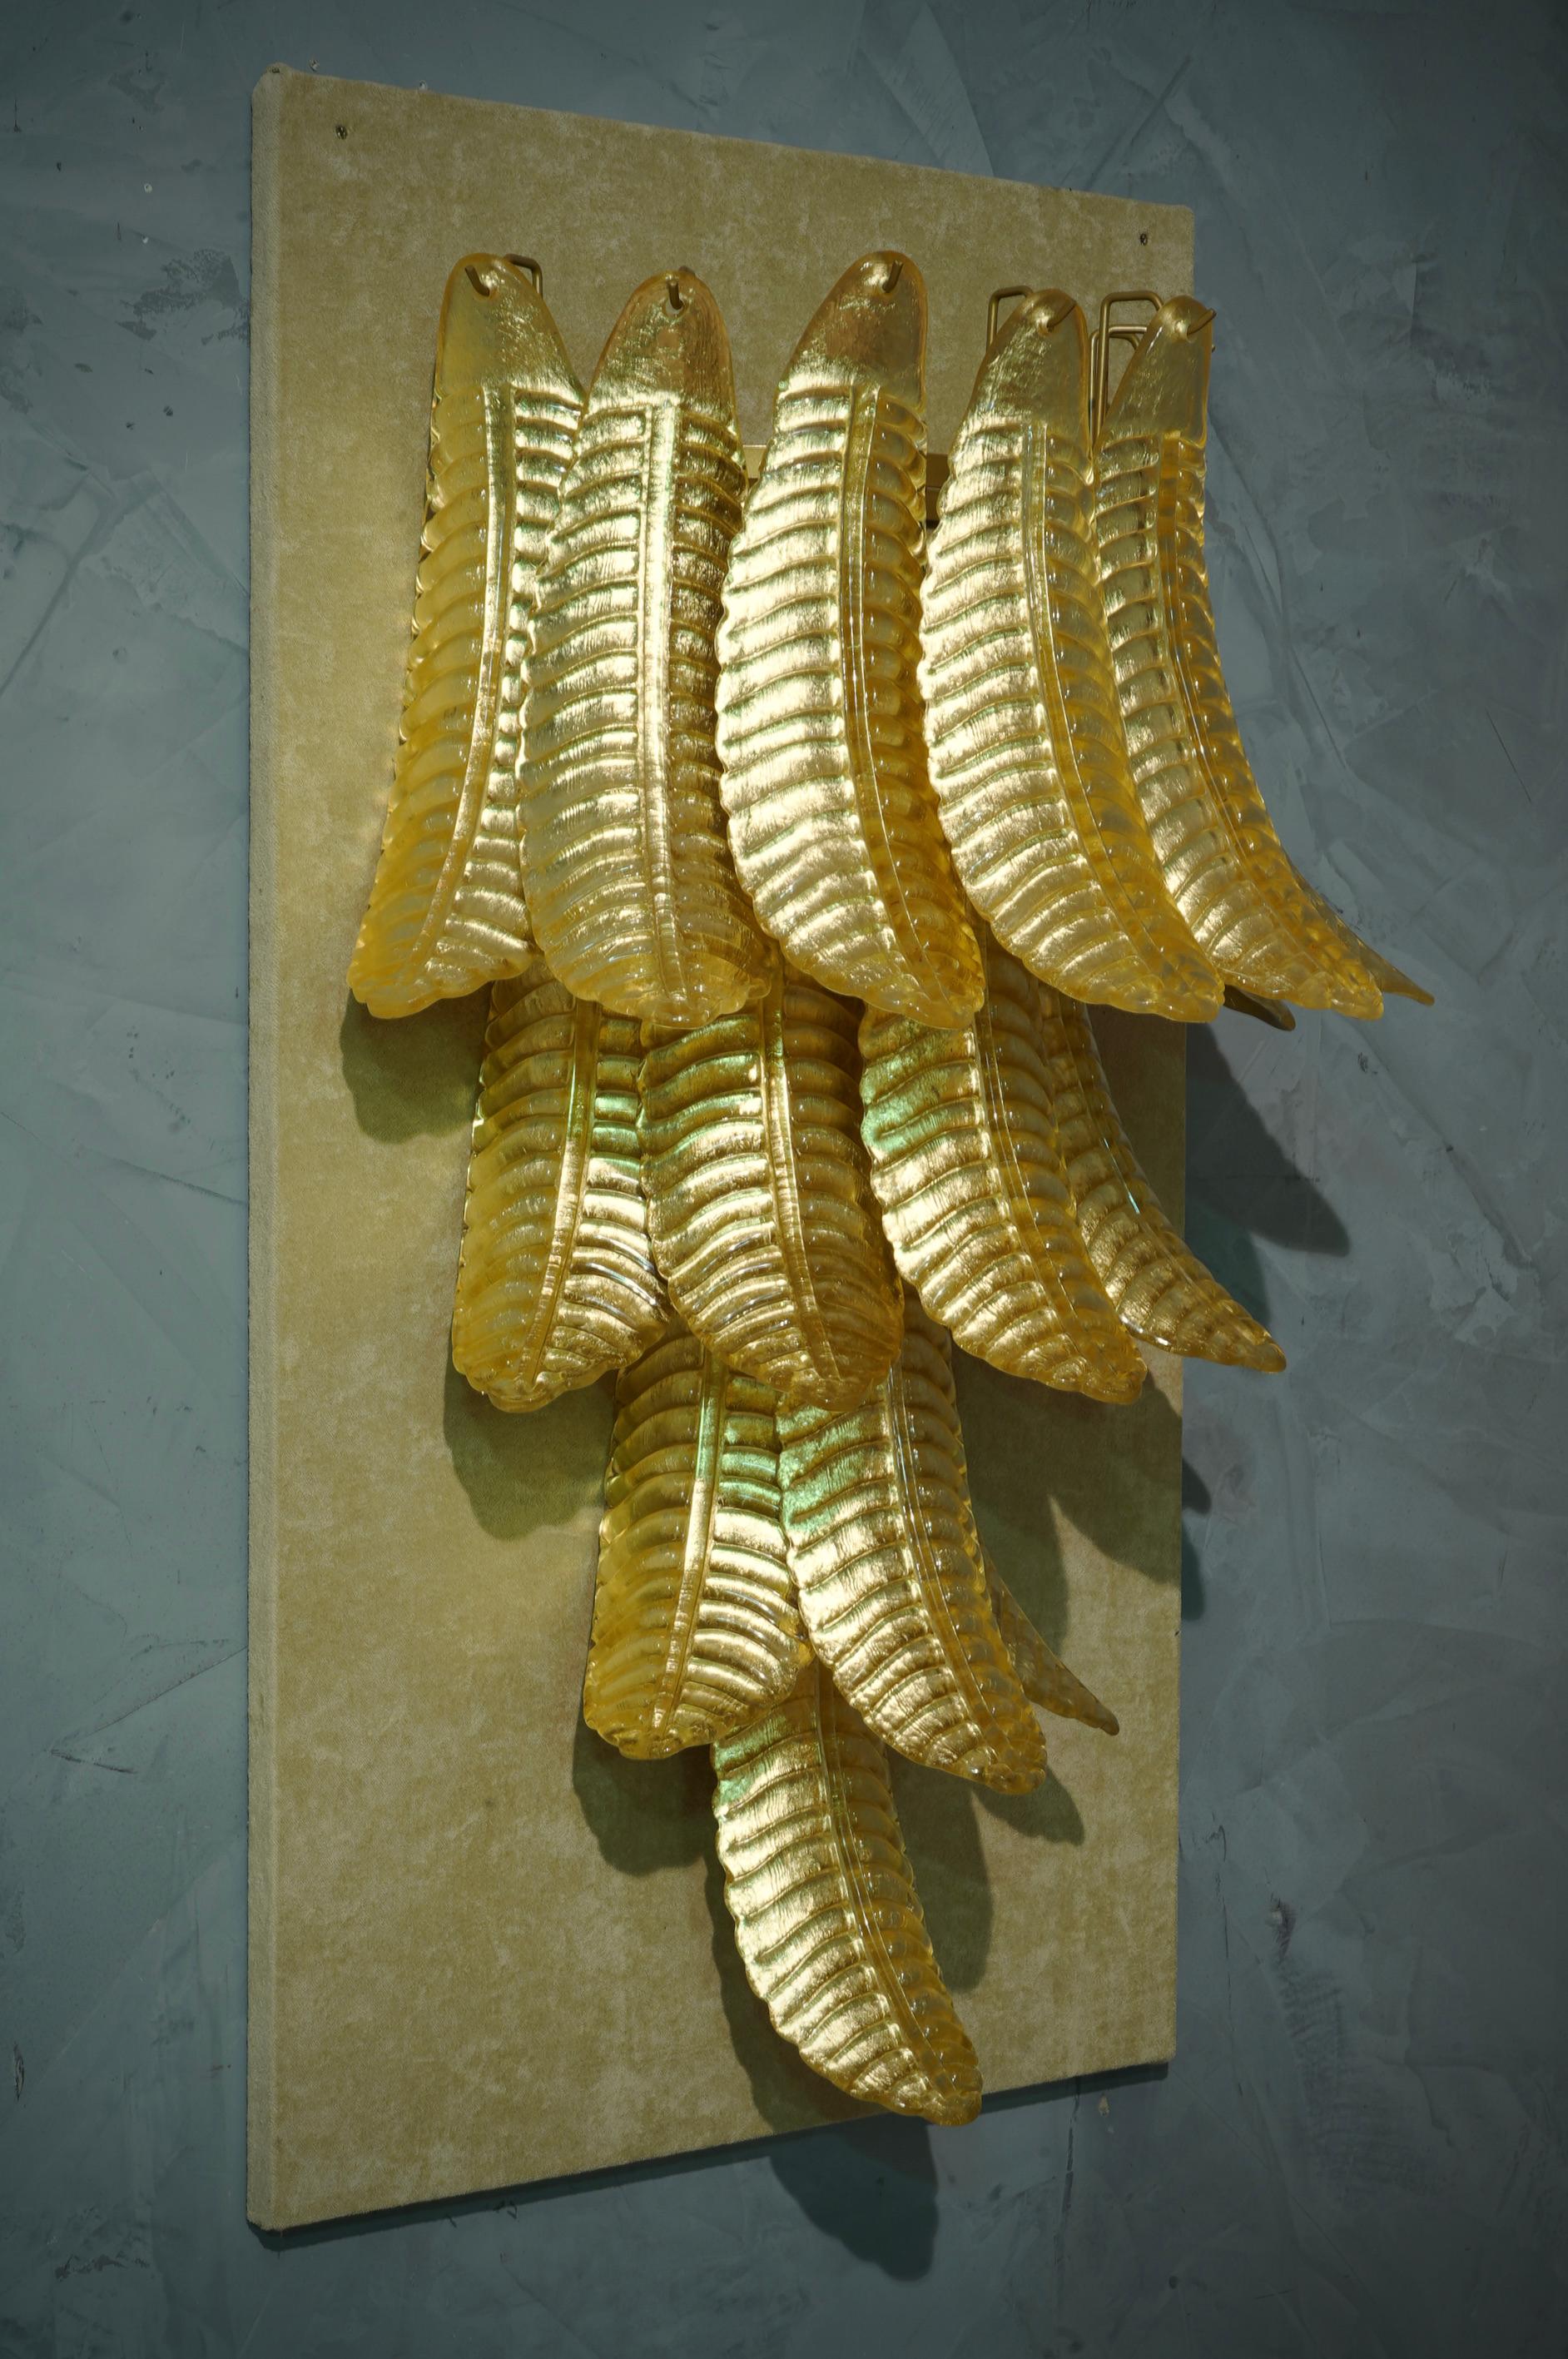 Sixteen beautiful leaves in classic gold-colored Murano glass. Rich design for a truly beautiful wall light. Simple and elegant as in Mazzega's style.

The applique is composed of a series of sixteen gold Murano glass leaves, positioned around an